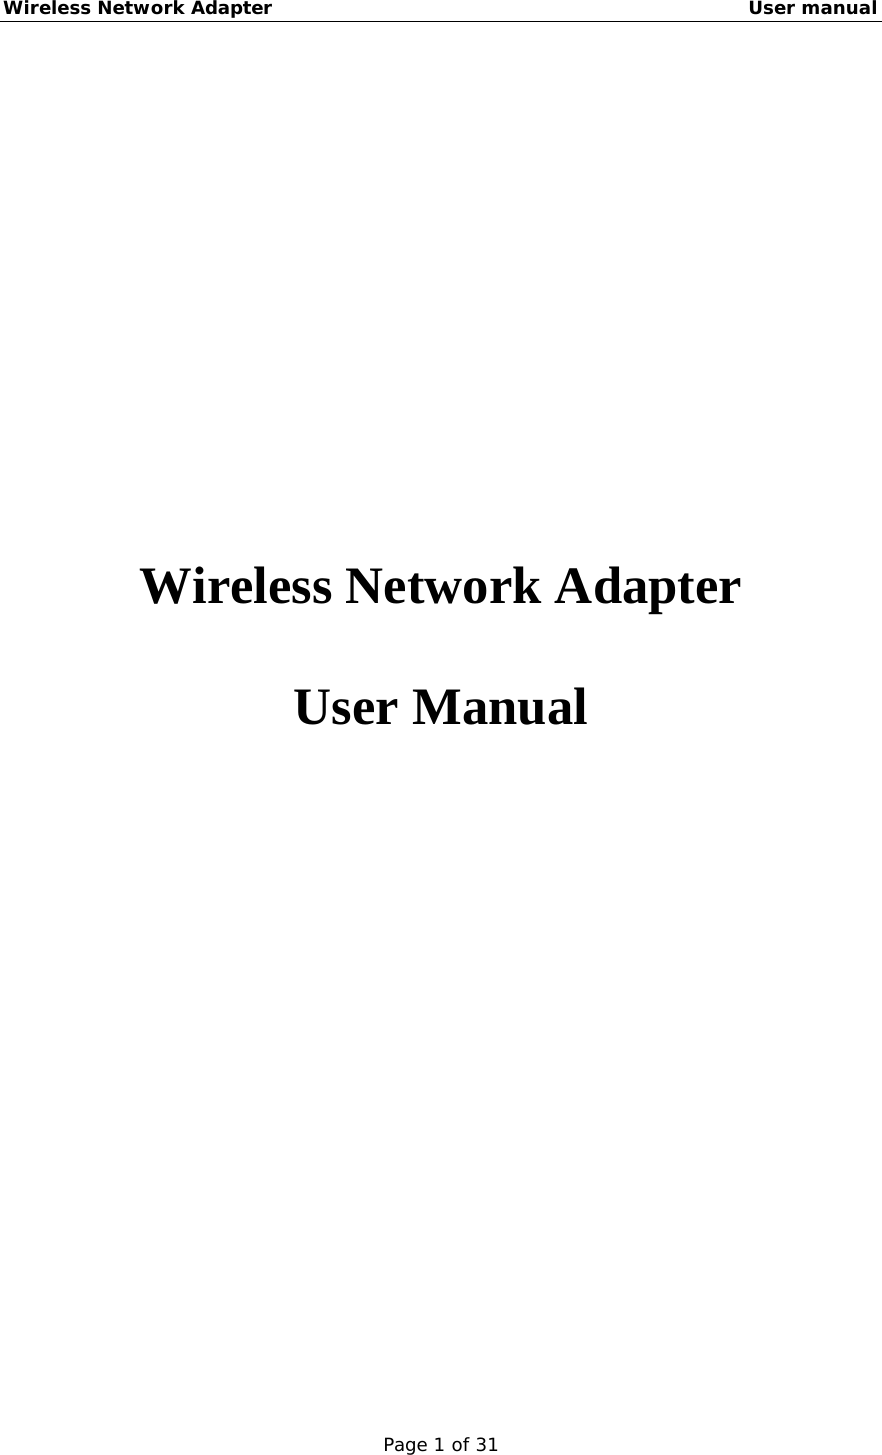 Wireless Network Adapter                                                    User manual Page 1 of 31     Wireless Network Adapter User Manual 